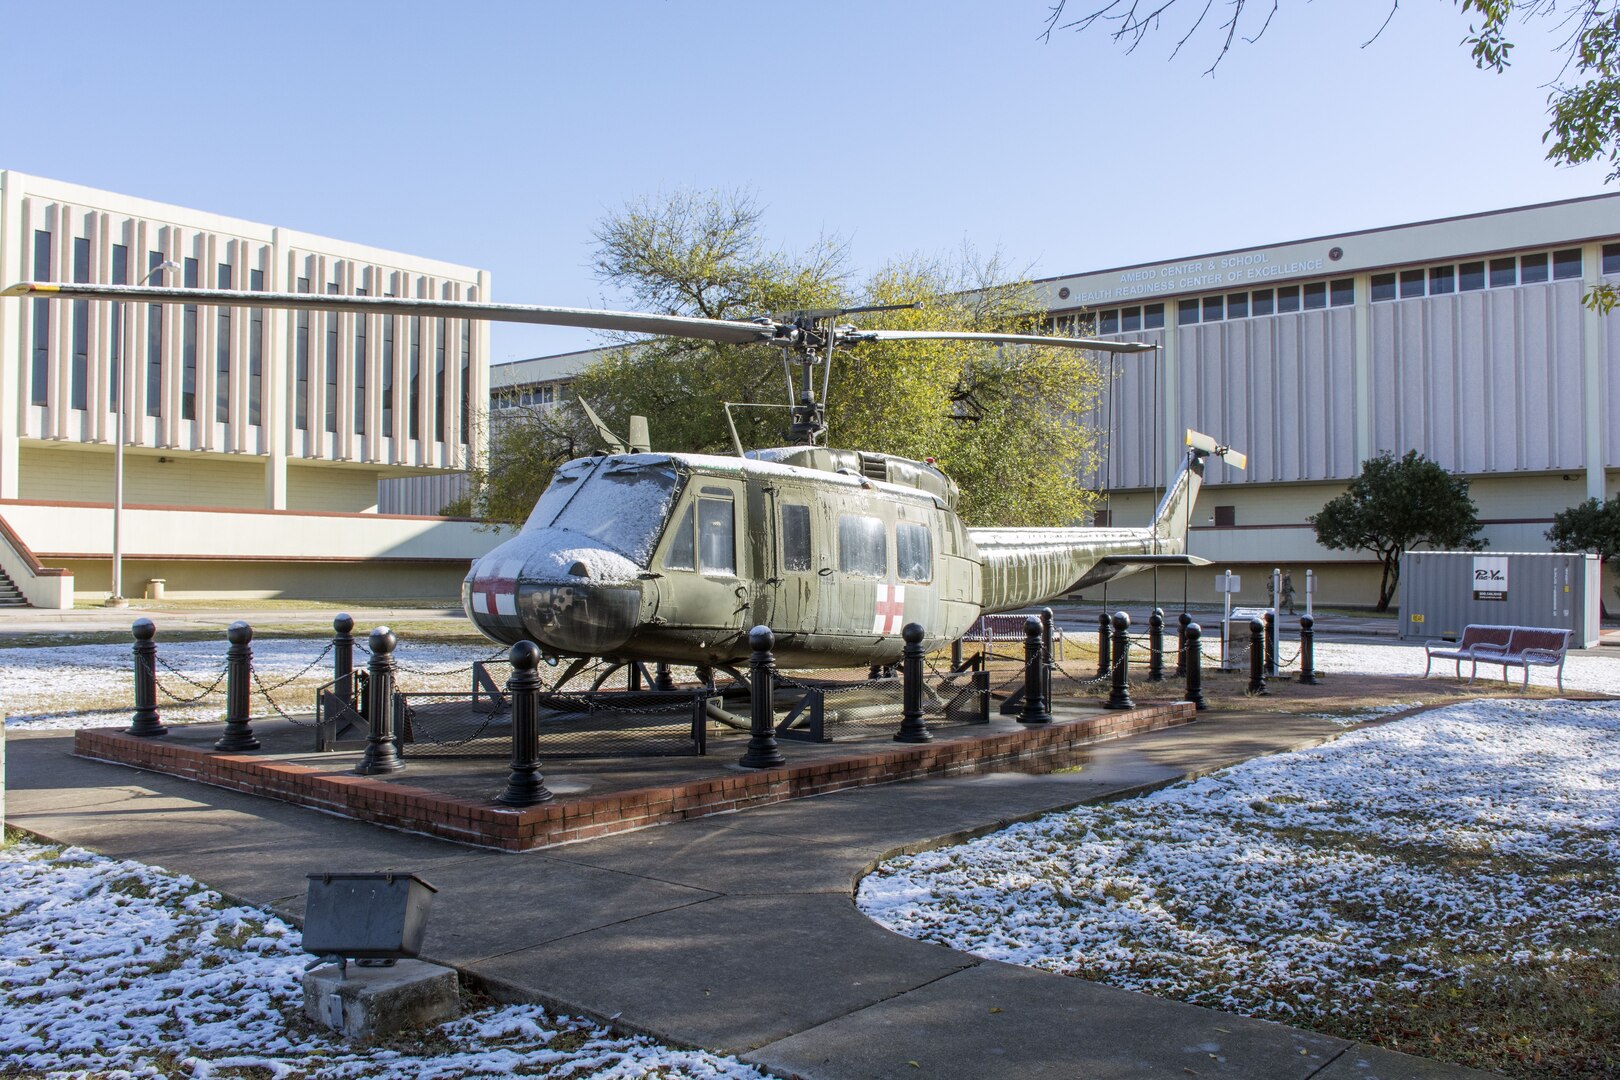 The UH-1 helicopter on display at the U.S. Army Medical Department Center and School partially covered in snow. Thursday's event was the earliest seasonal snowfall on record for San Antonio.